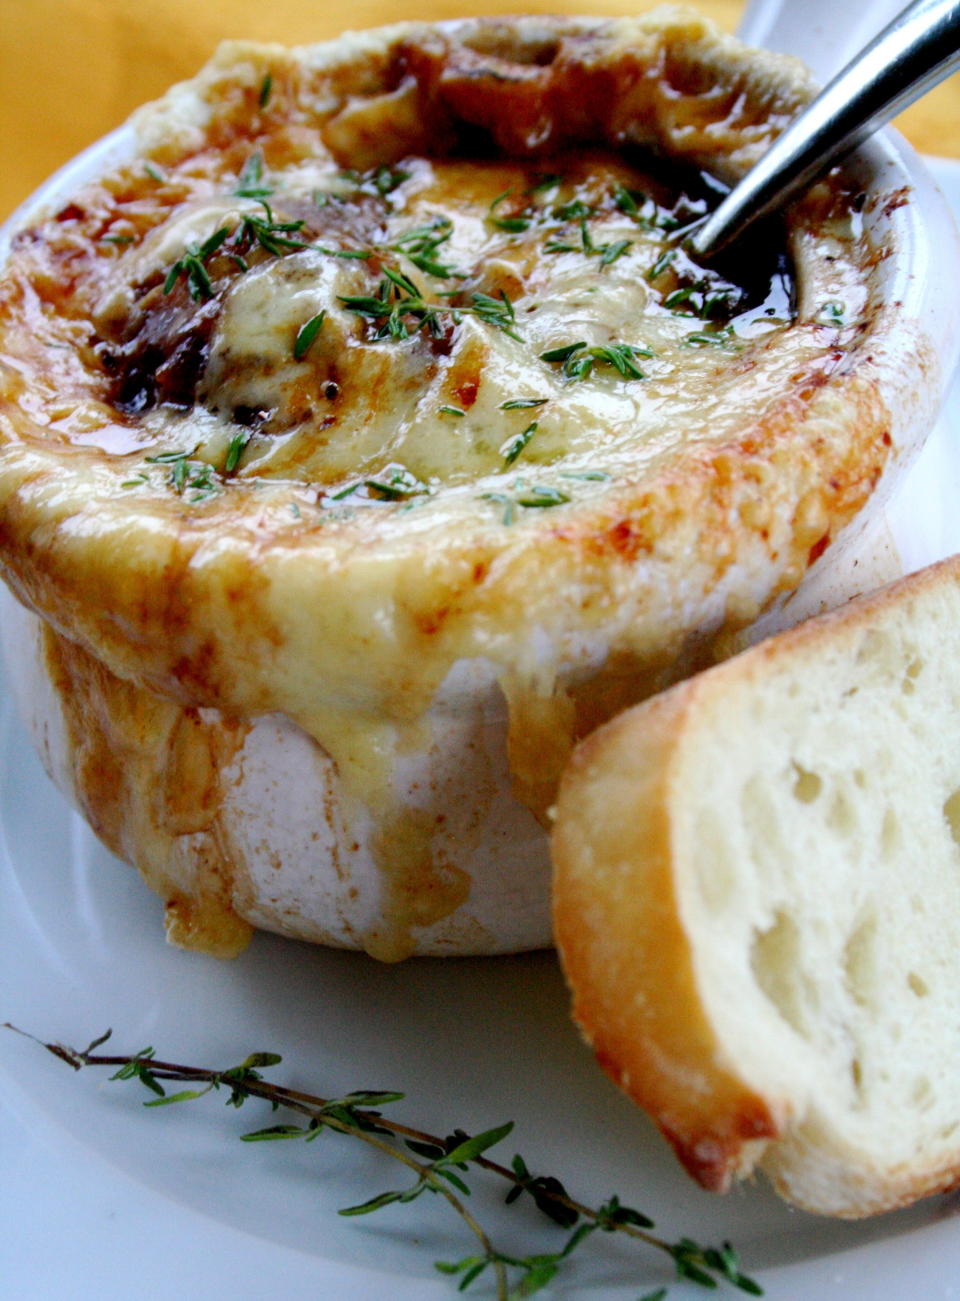 <strong>Get the <a href="http://www.thecurvycarrot.com/2010/08/07/henris-french-onion-soup/">French Onion Soup recipe from The Curvy Carrot</a></strong>  The picture really says it all, right?